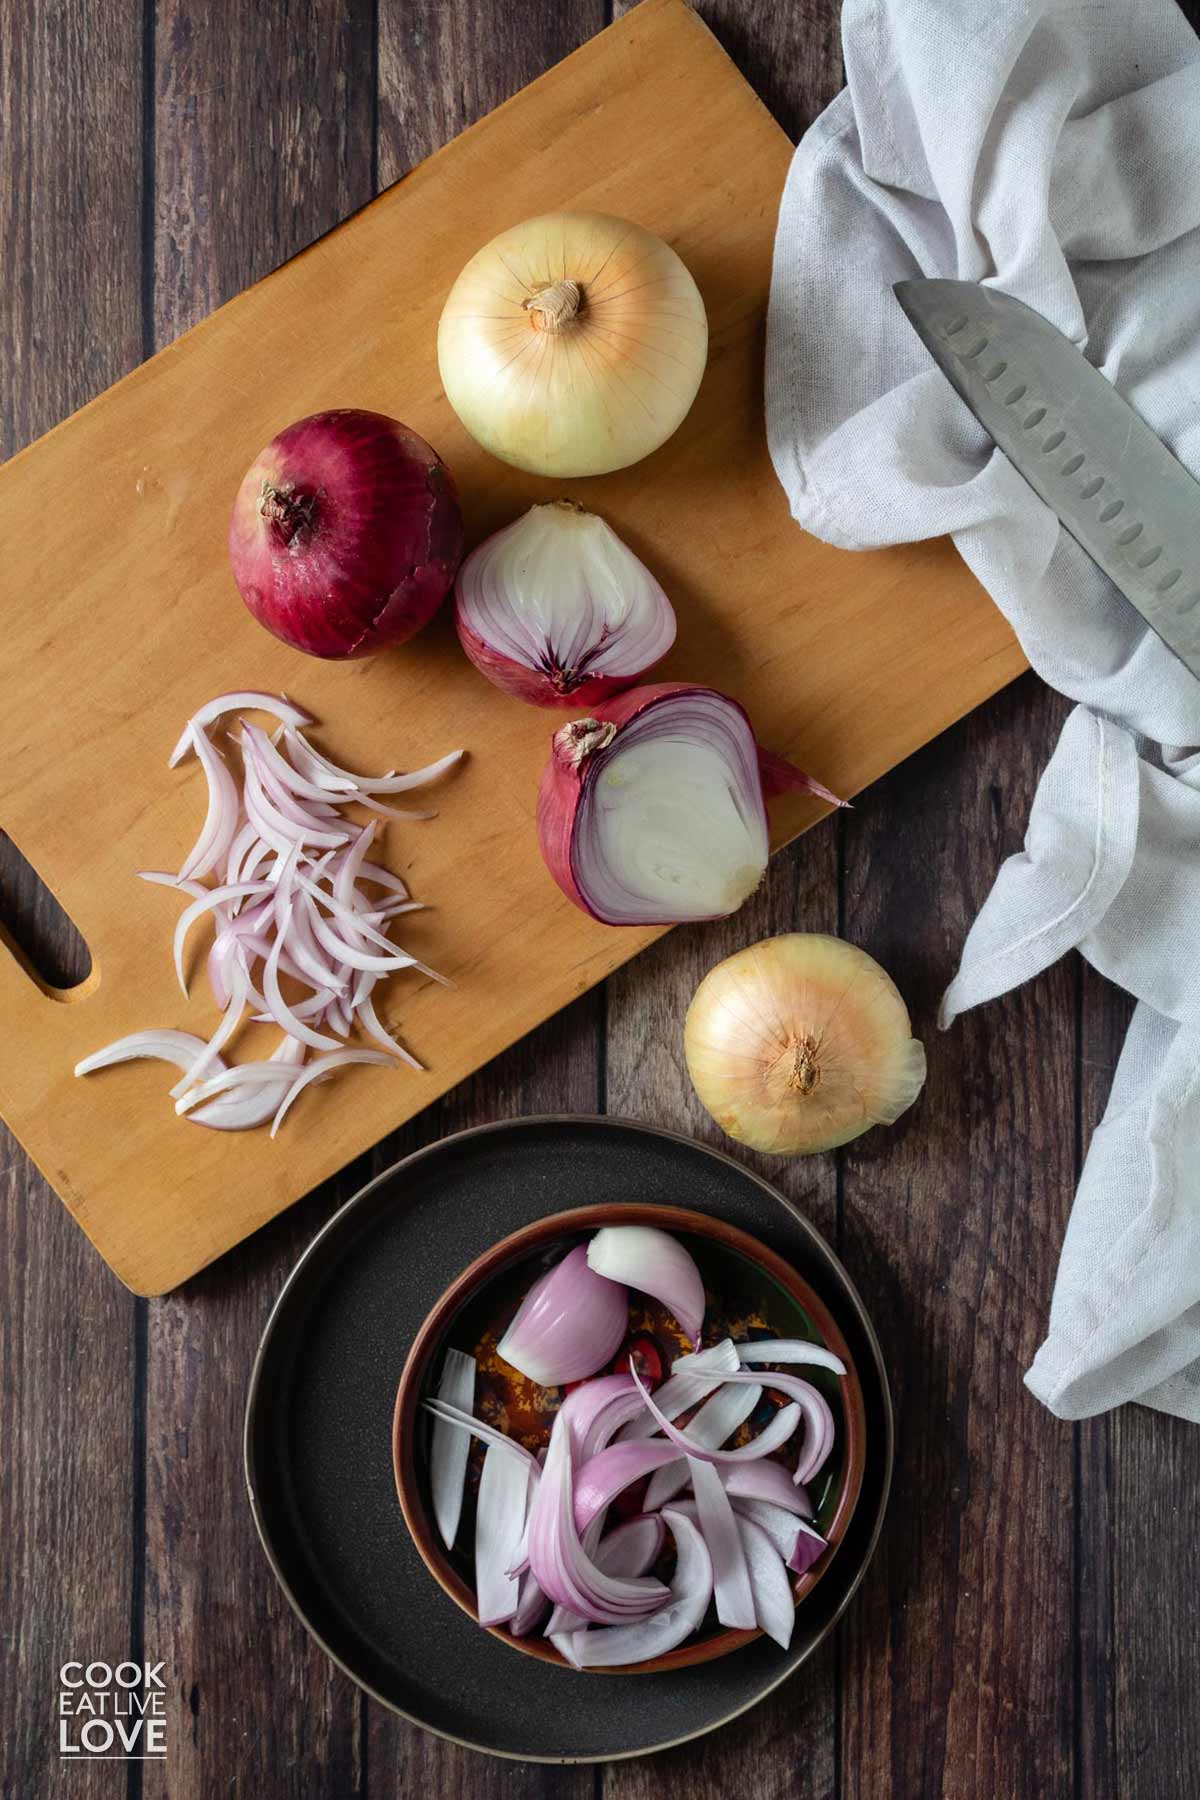 Red and yellow onions on a cutting board with some slices and one cut in half.